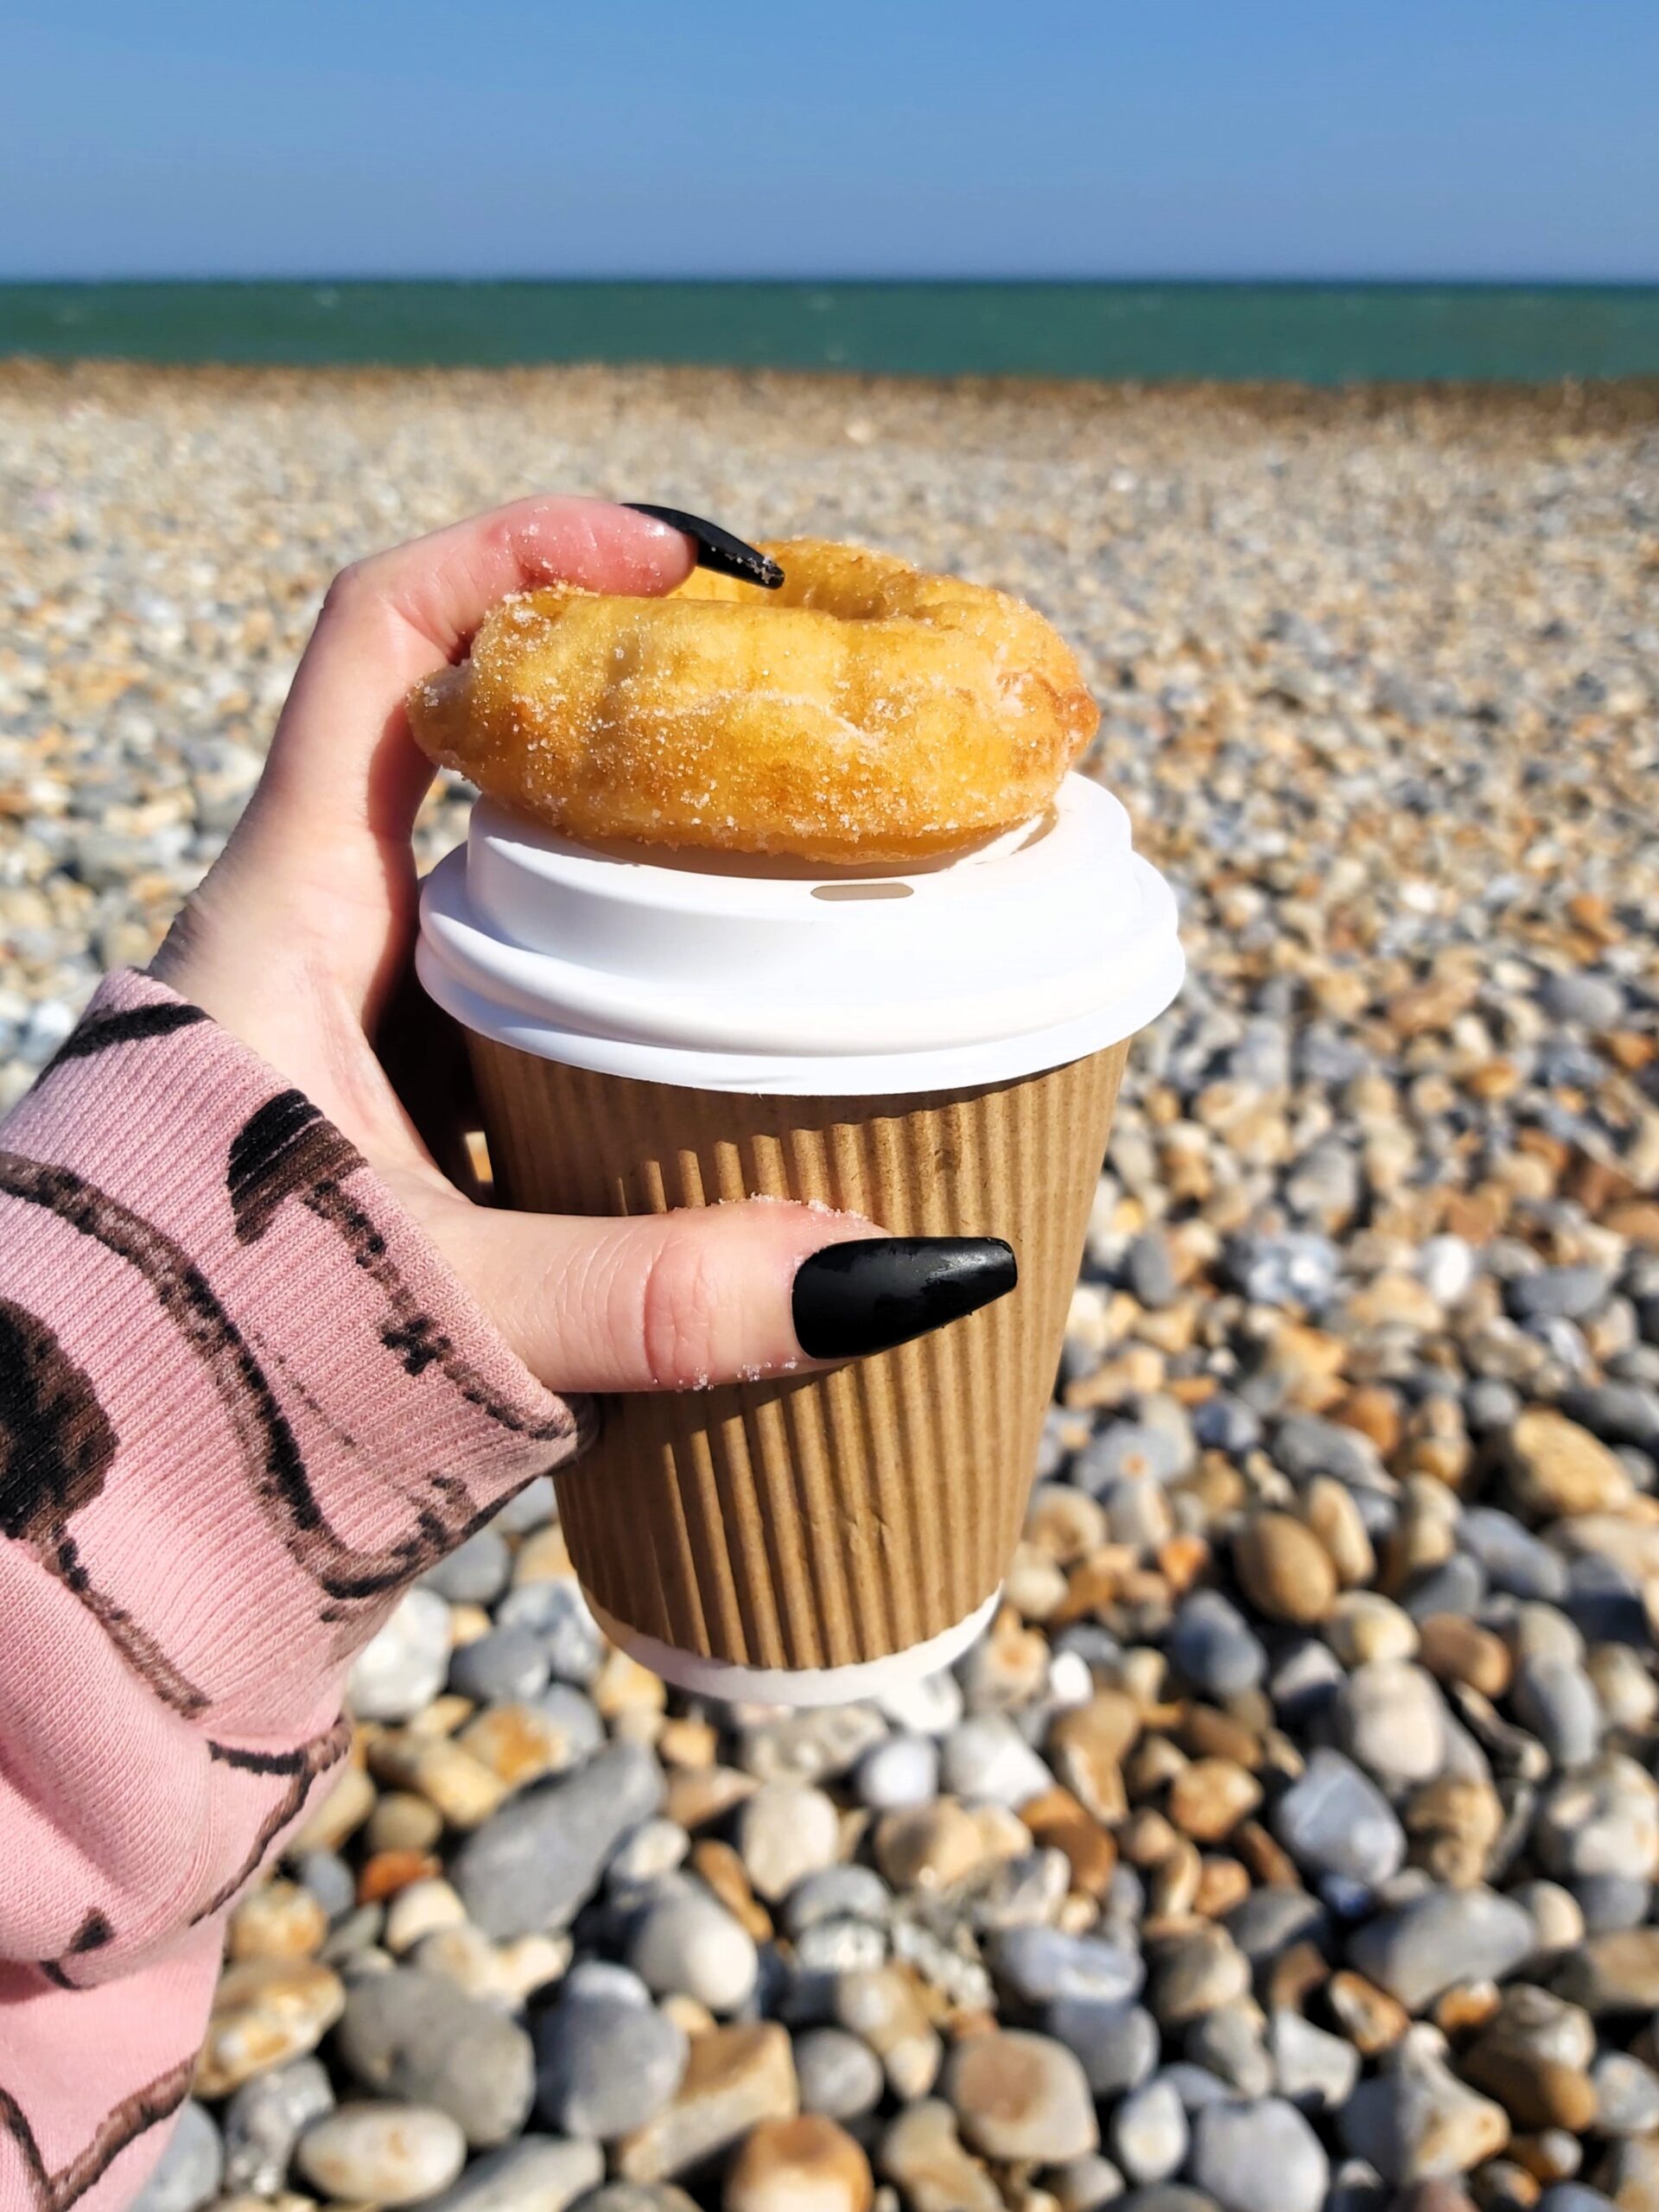 Wandering Lewis, with long black nails, holds a donut and coffee on the beach at Hastings, England.